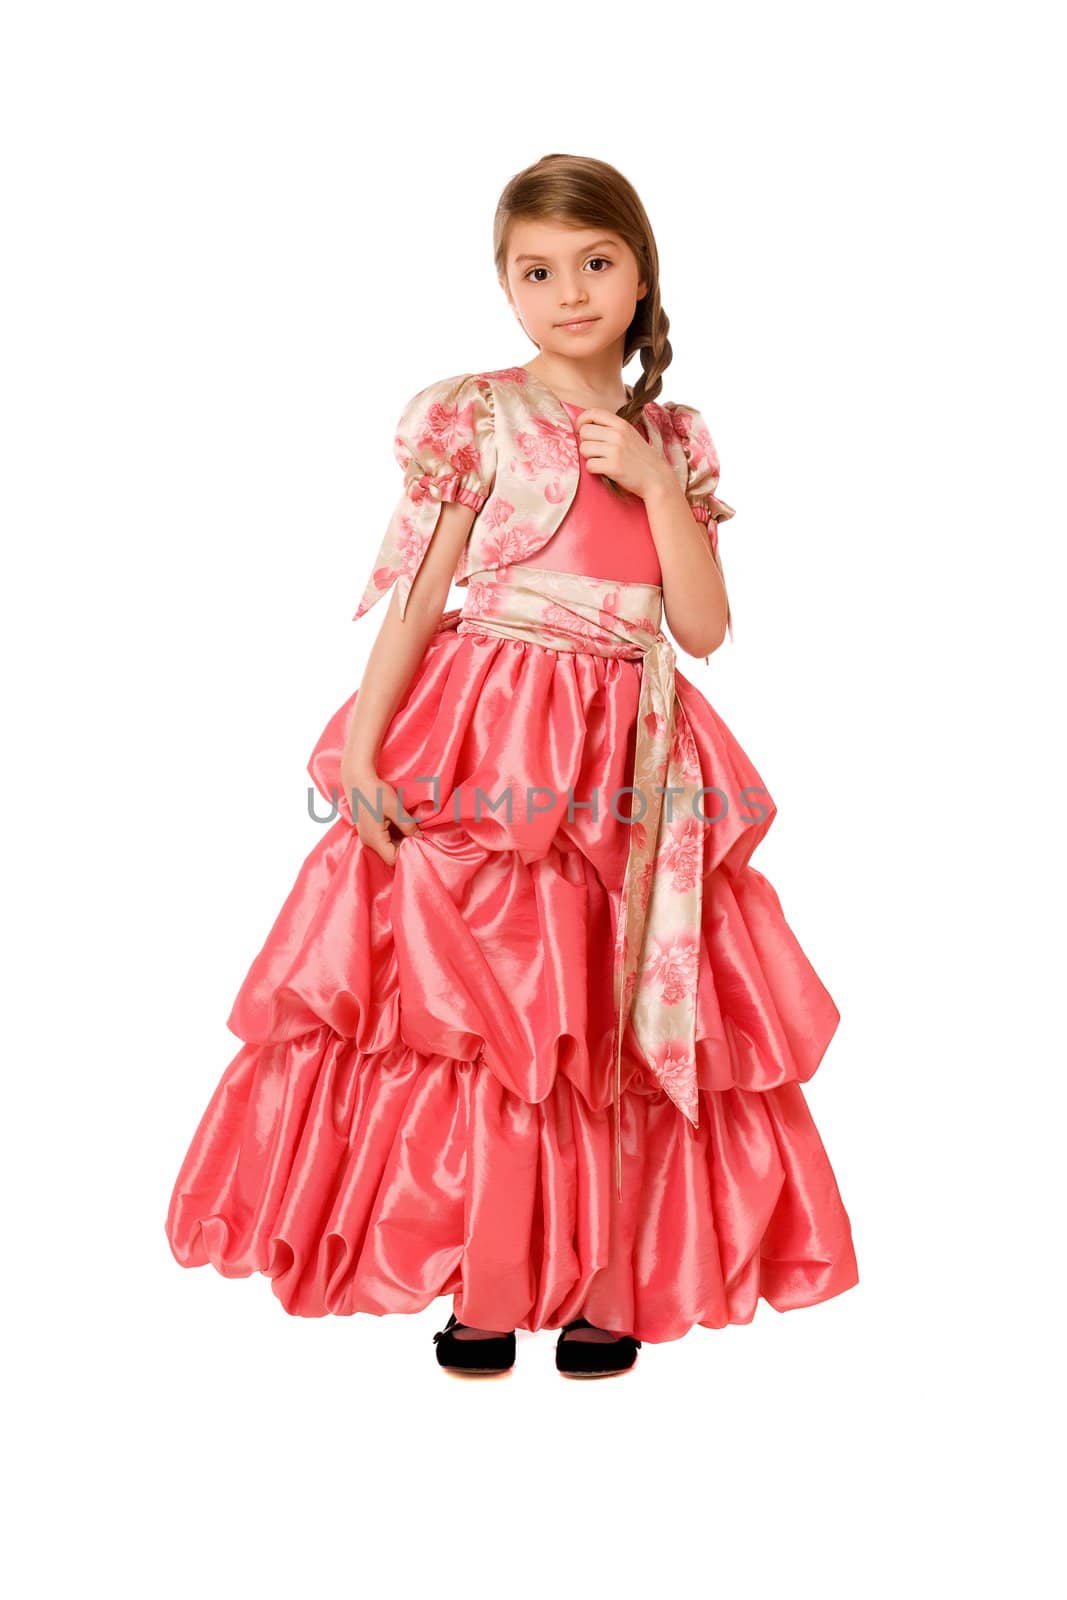 Charming little girl in a long dress. Isolated